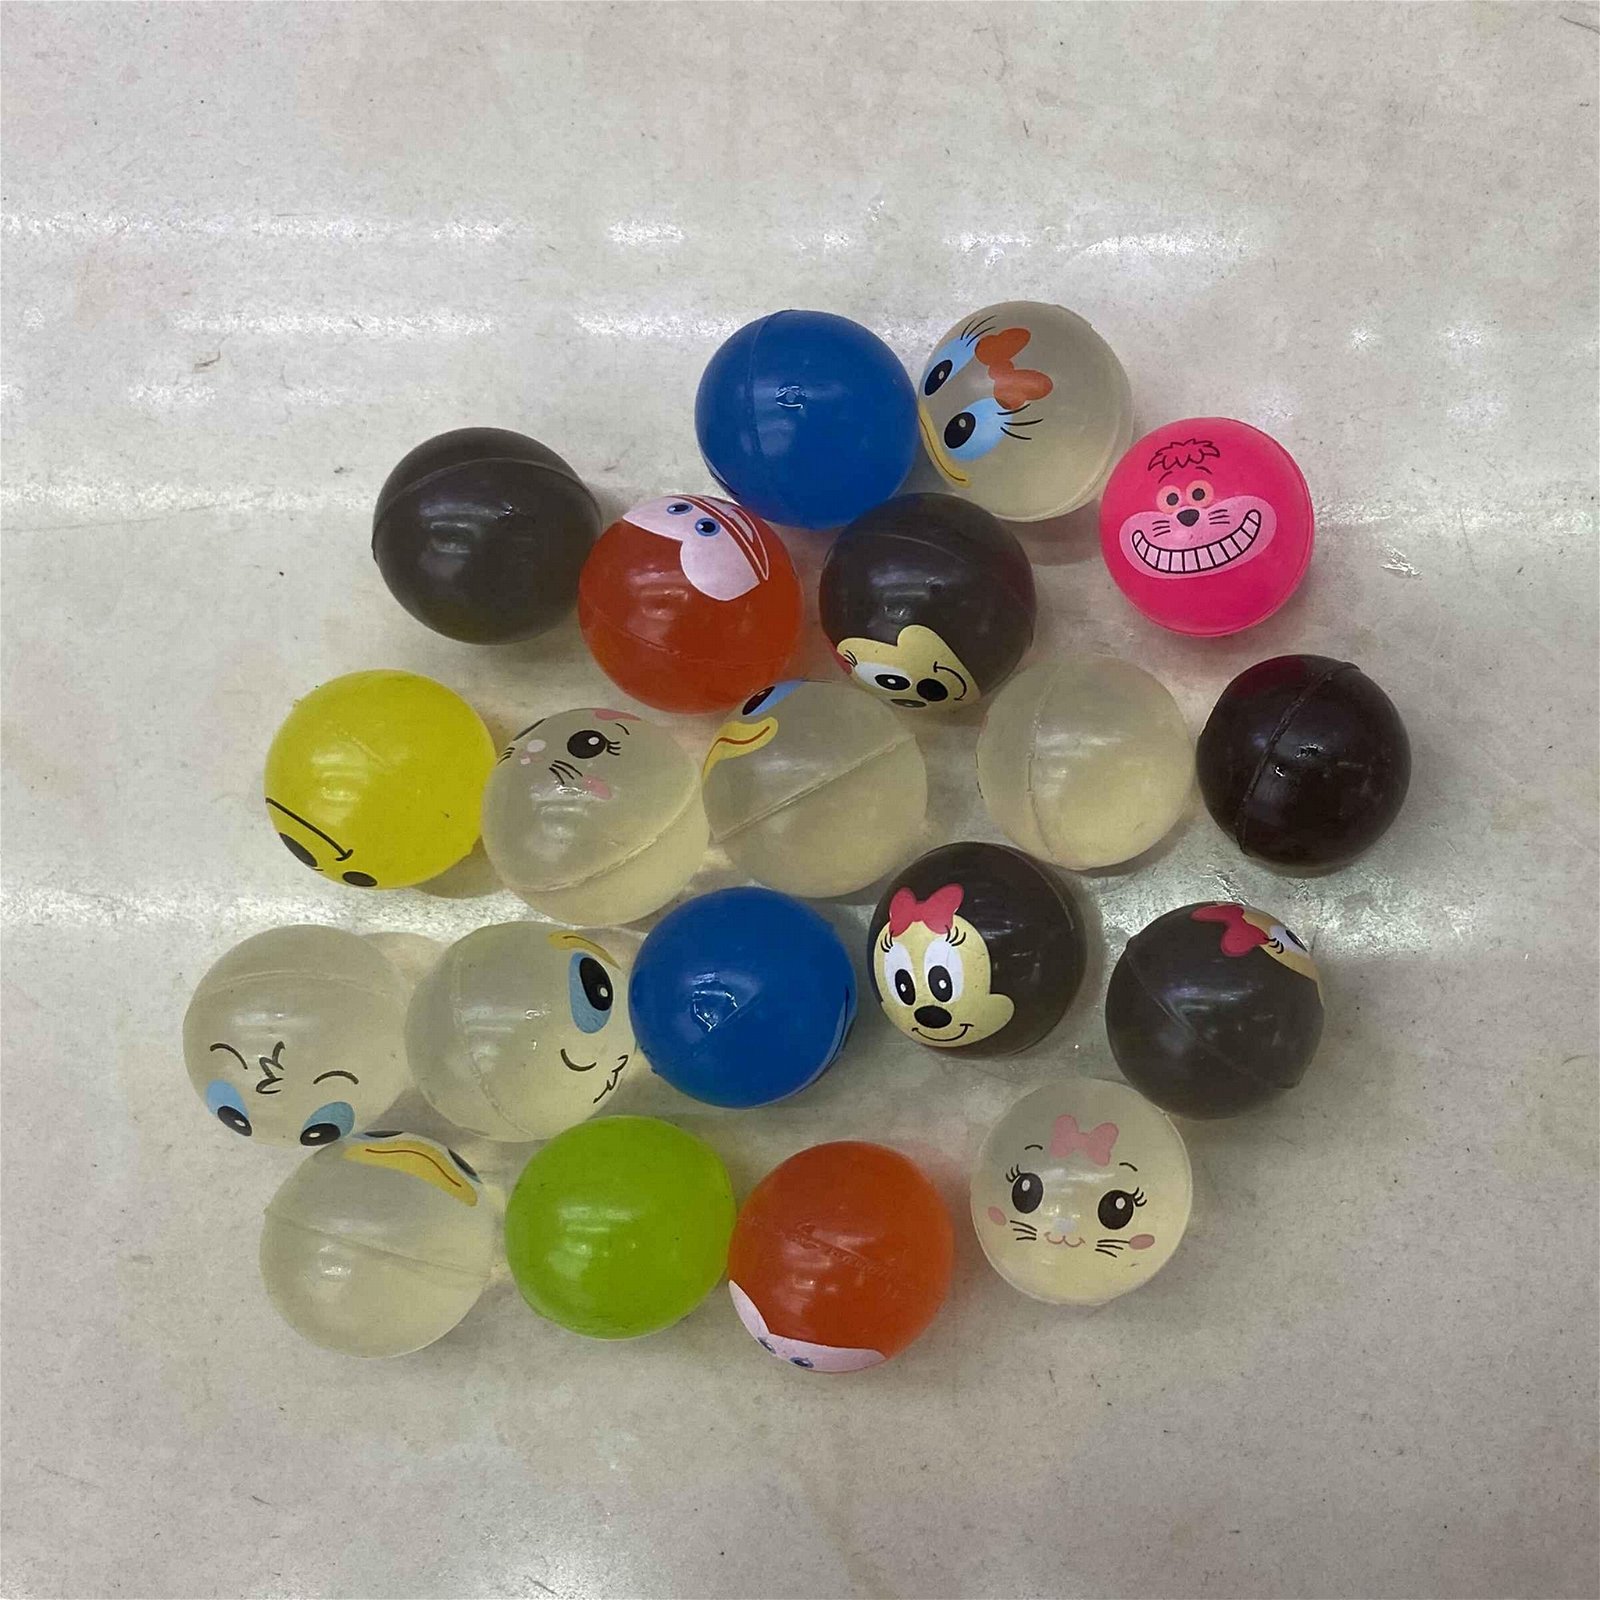 32mm transparent high bouncing balls with sorts of animation patterns